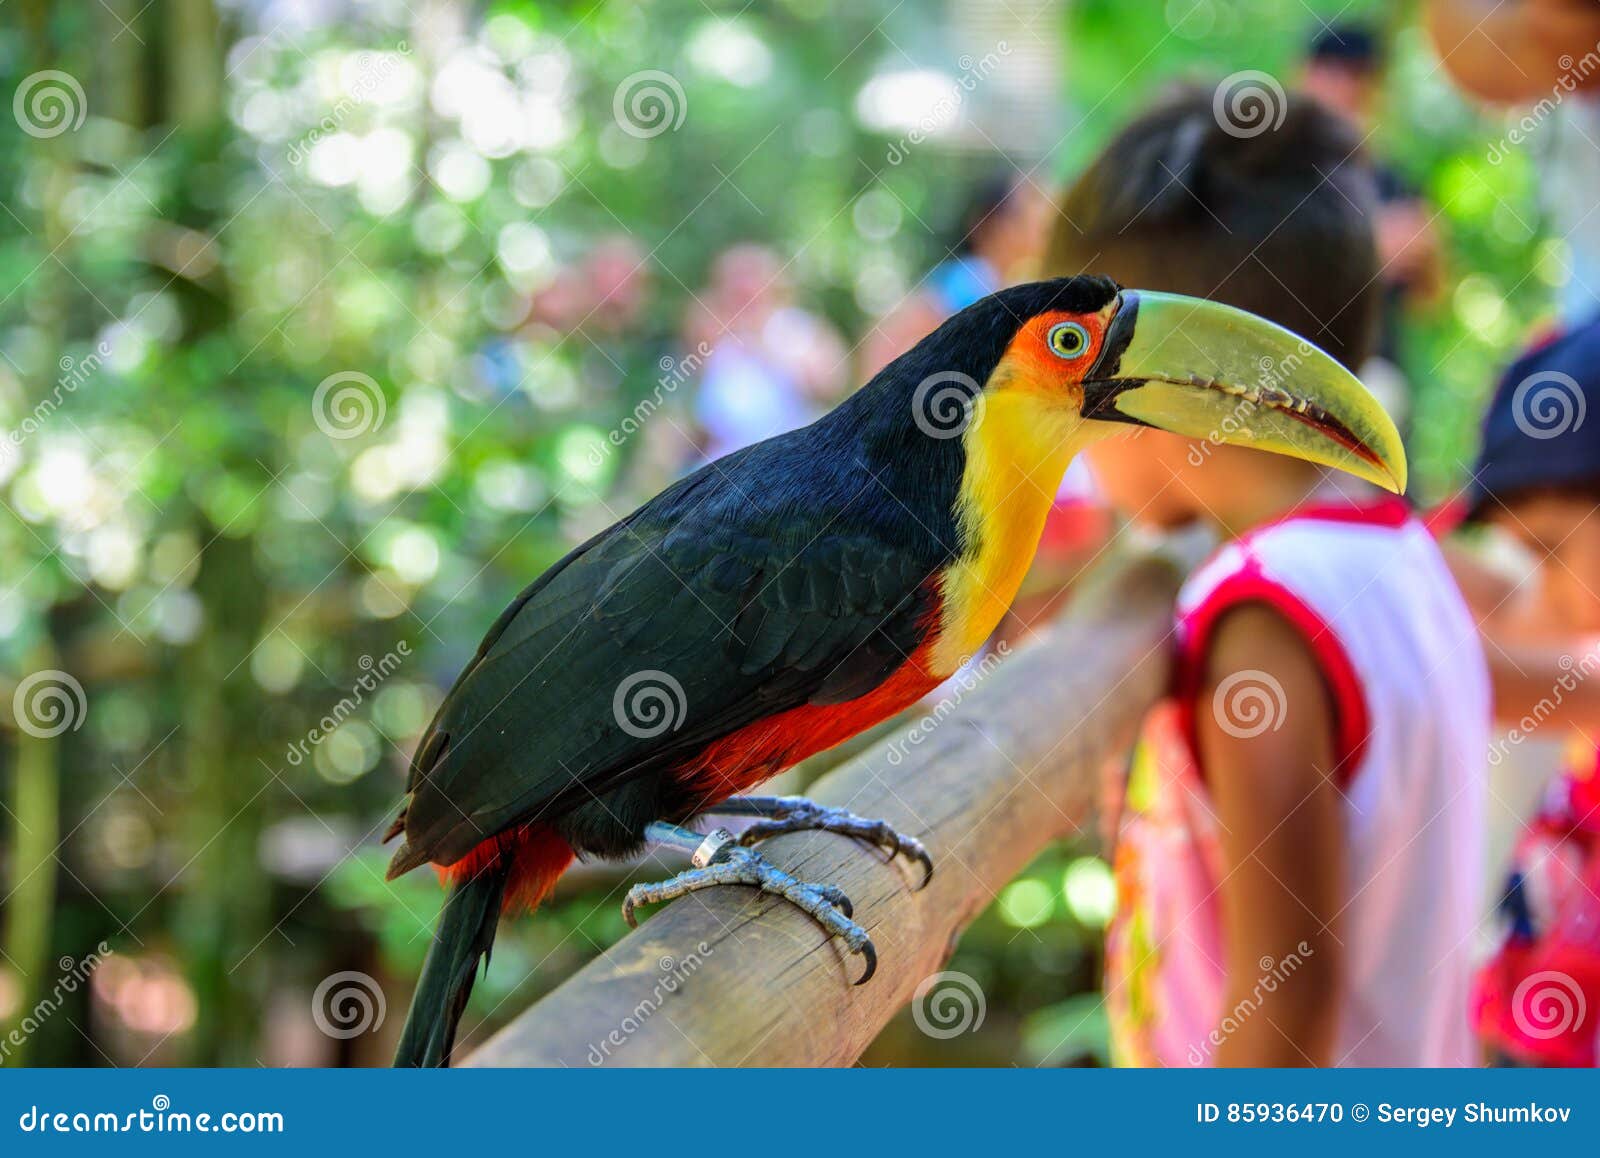 the colorful green-billed toucan sitting on the wood in iguacu national park on the background of blurry kids